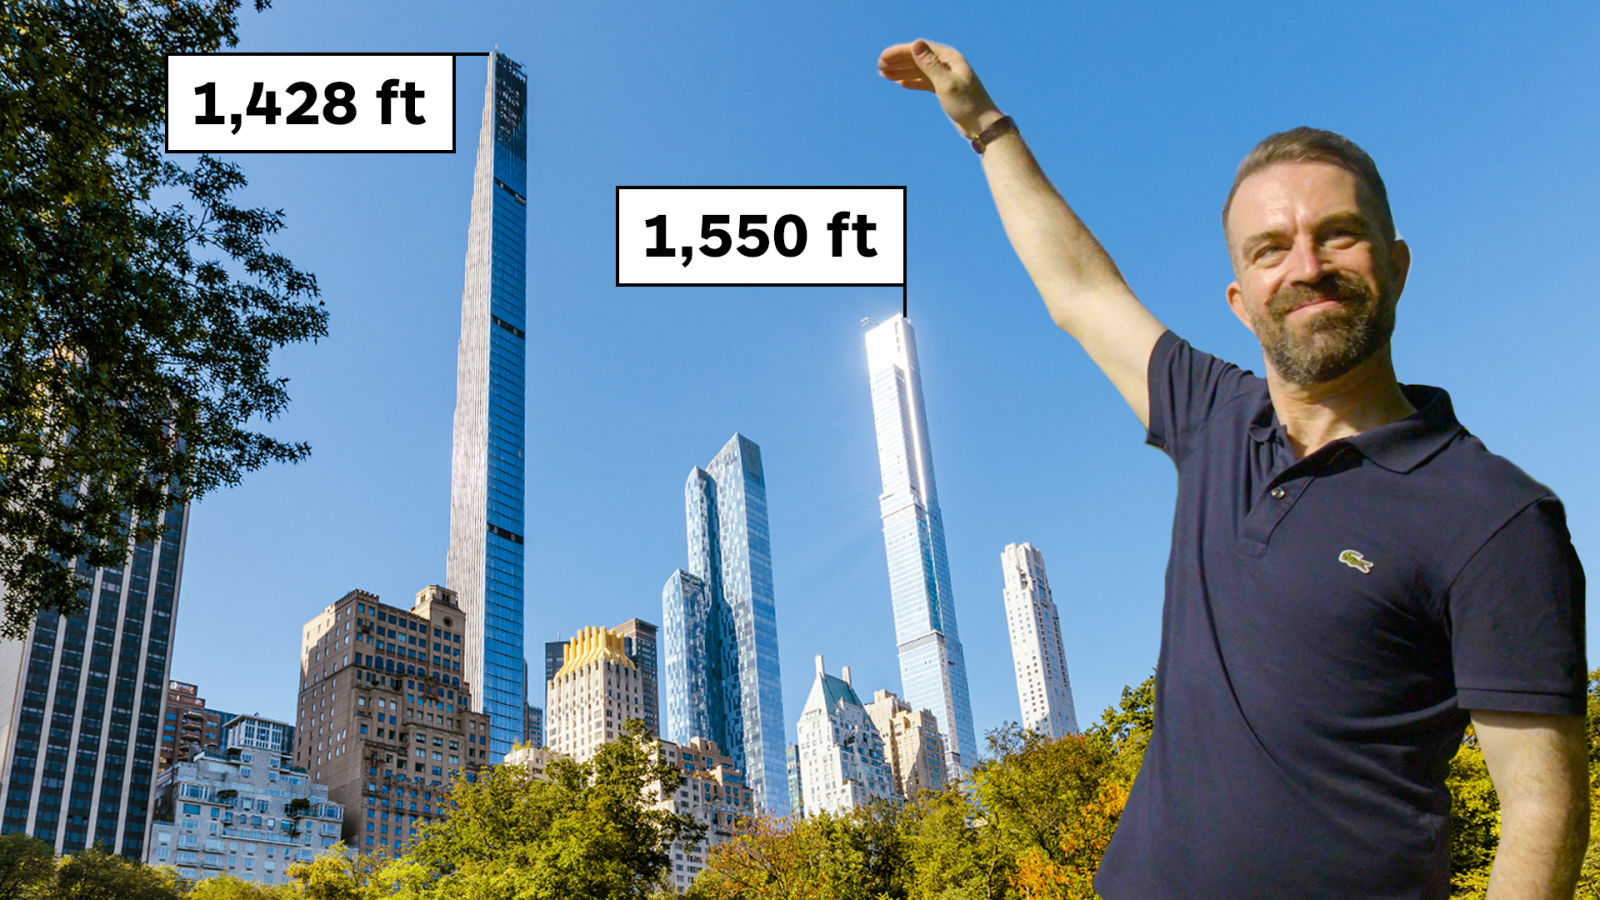 Why The World’s Tallest Apartment Buildings Are On The Same Street